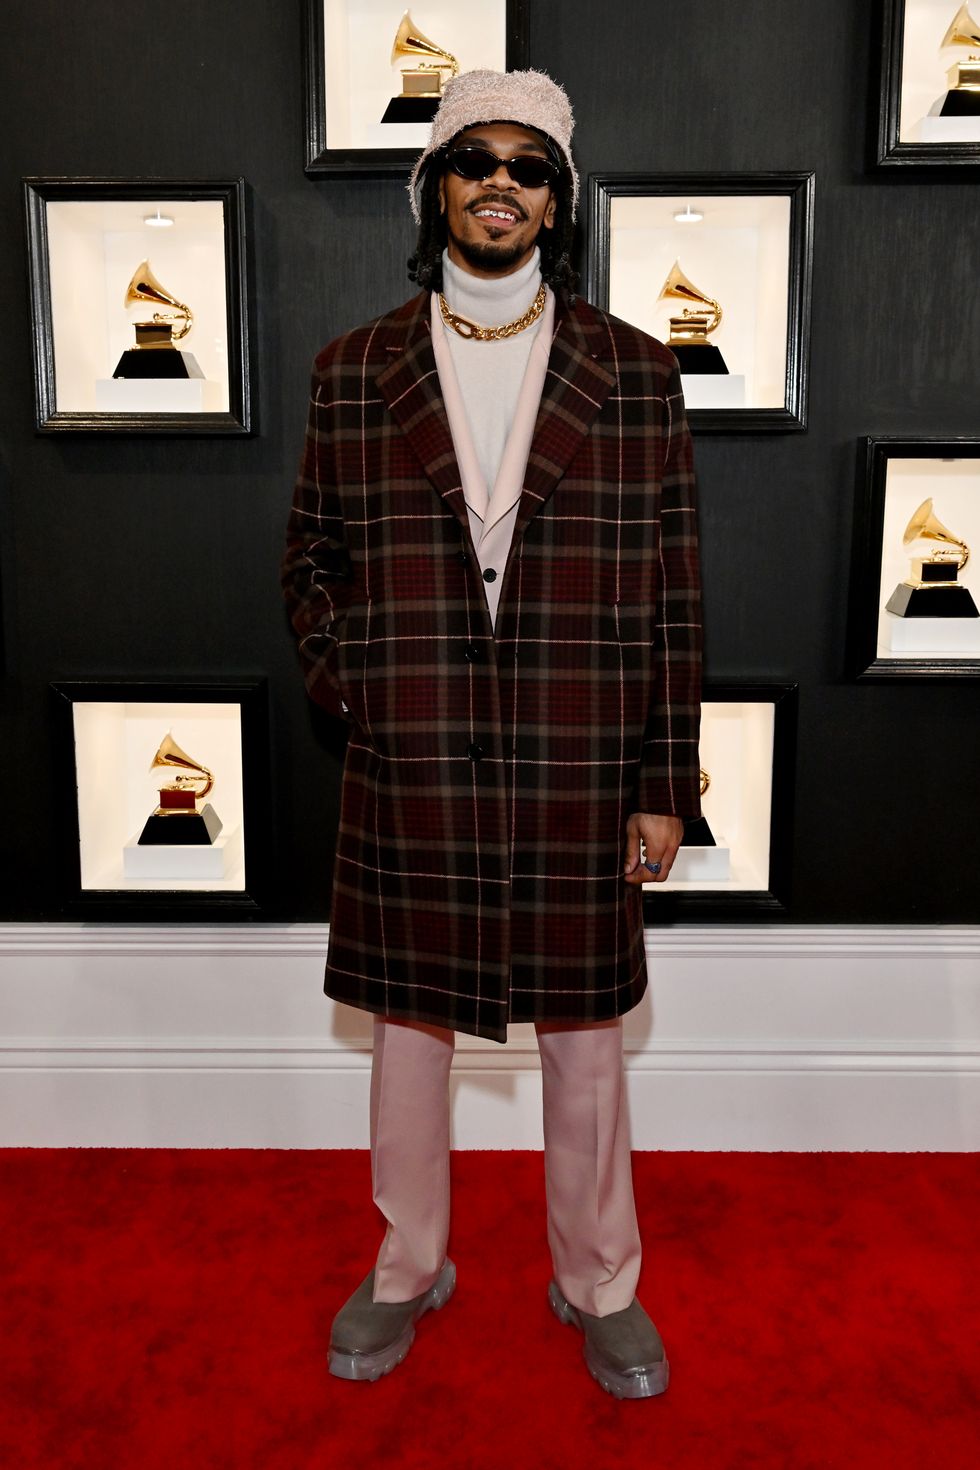 Grammys 2023: The Best-Dressed Men on the Red Carpet